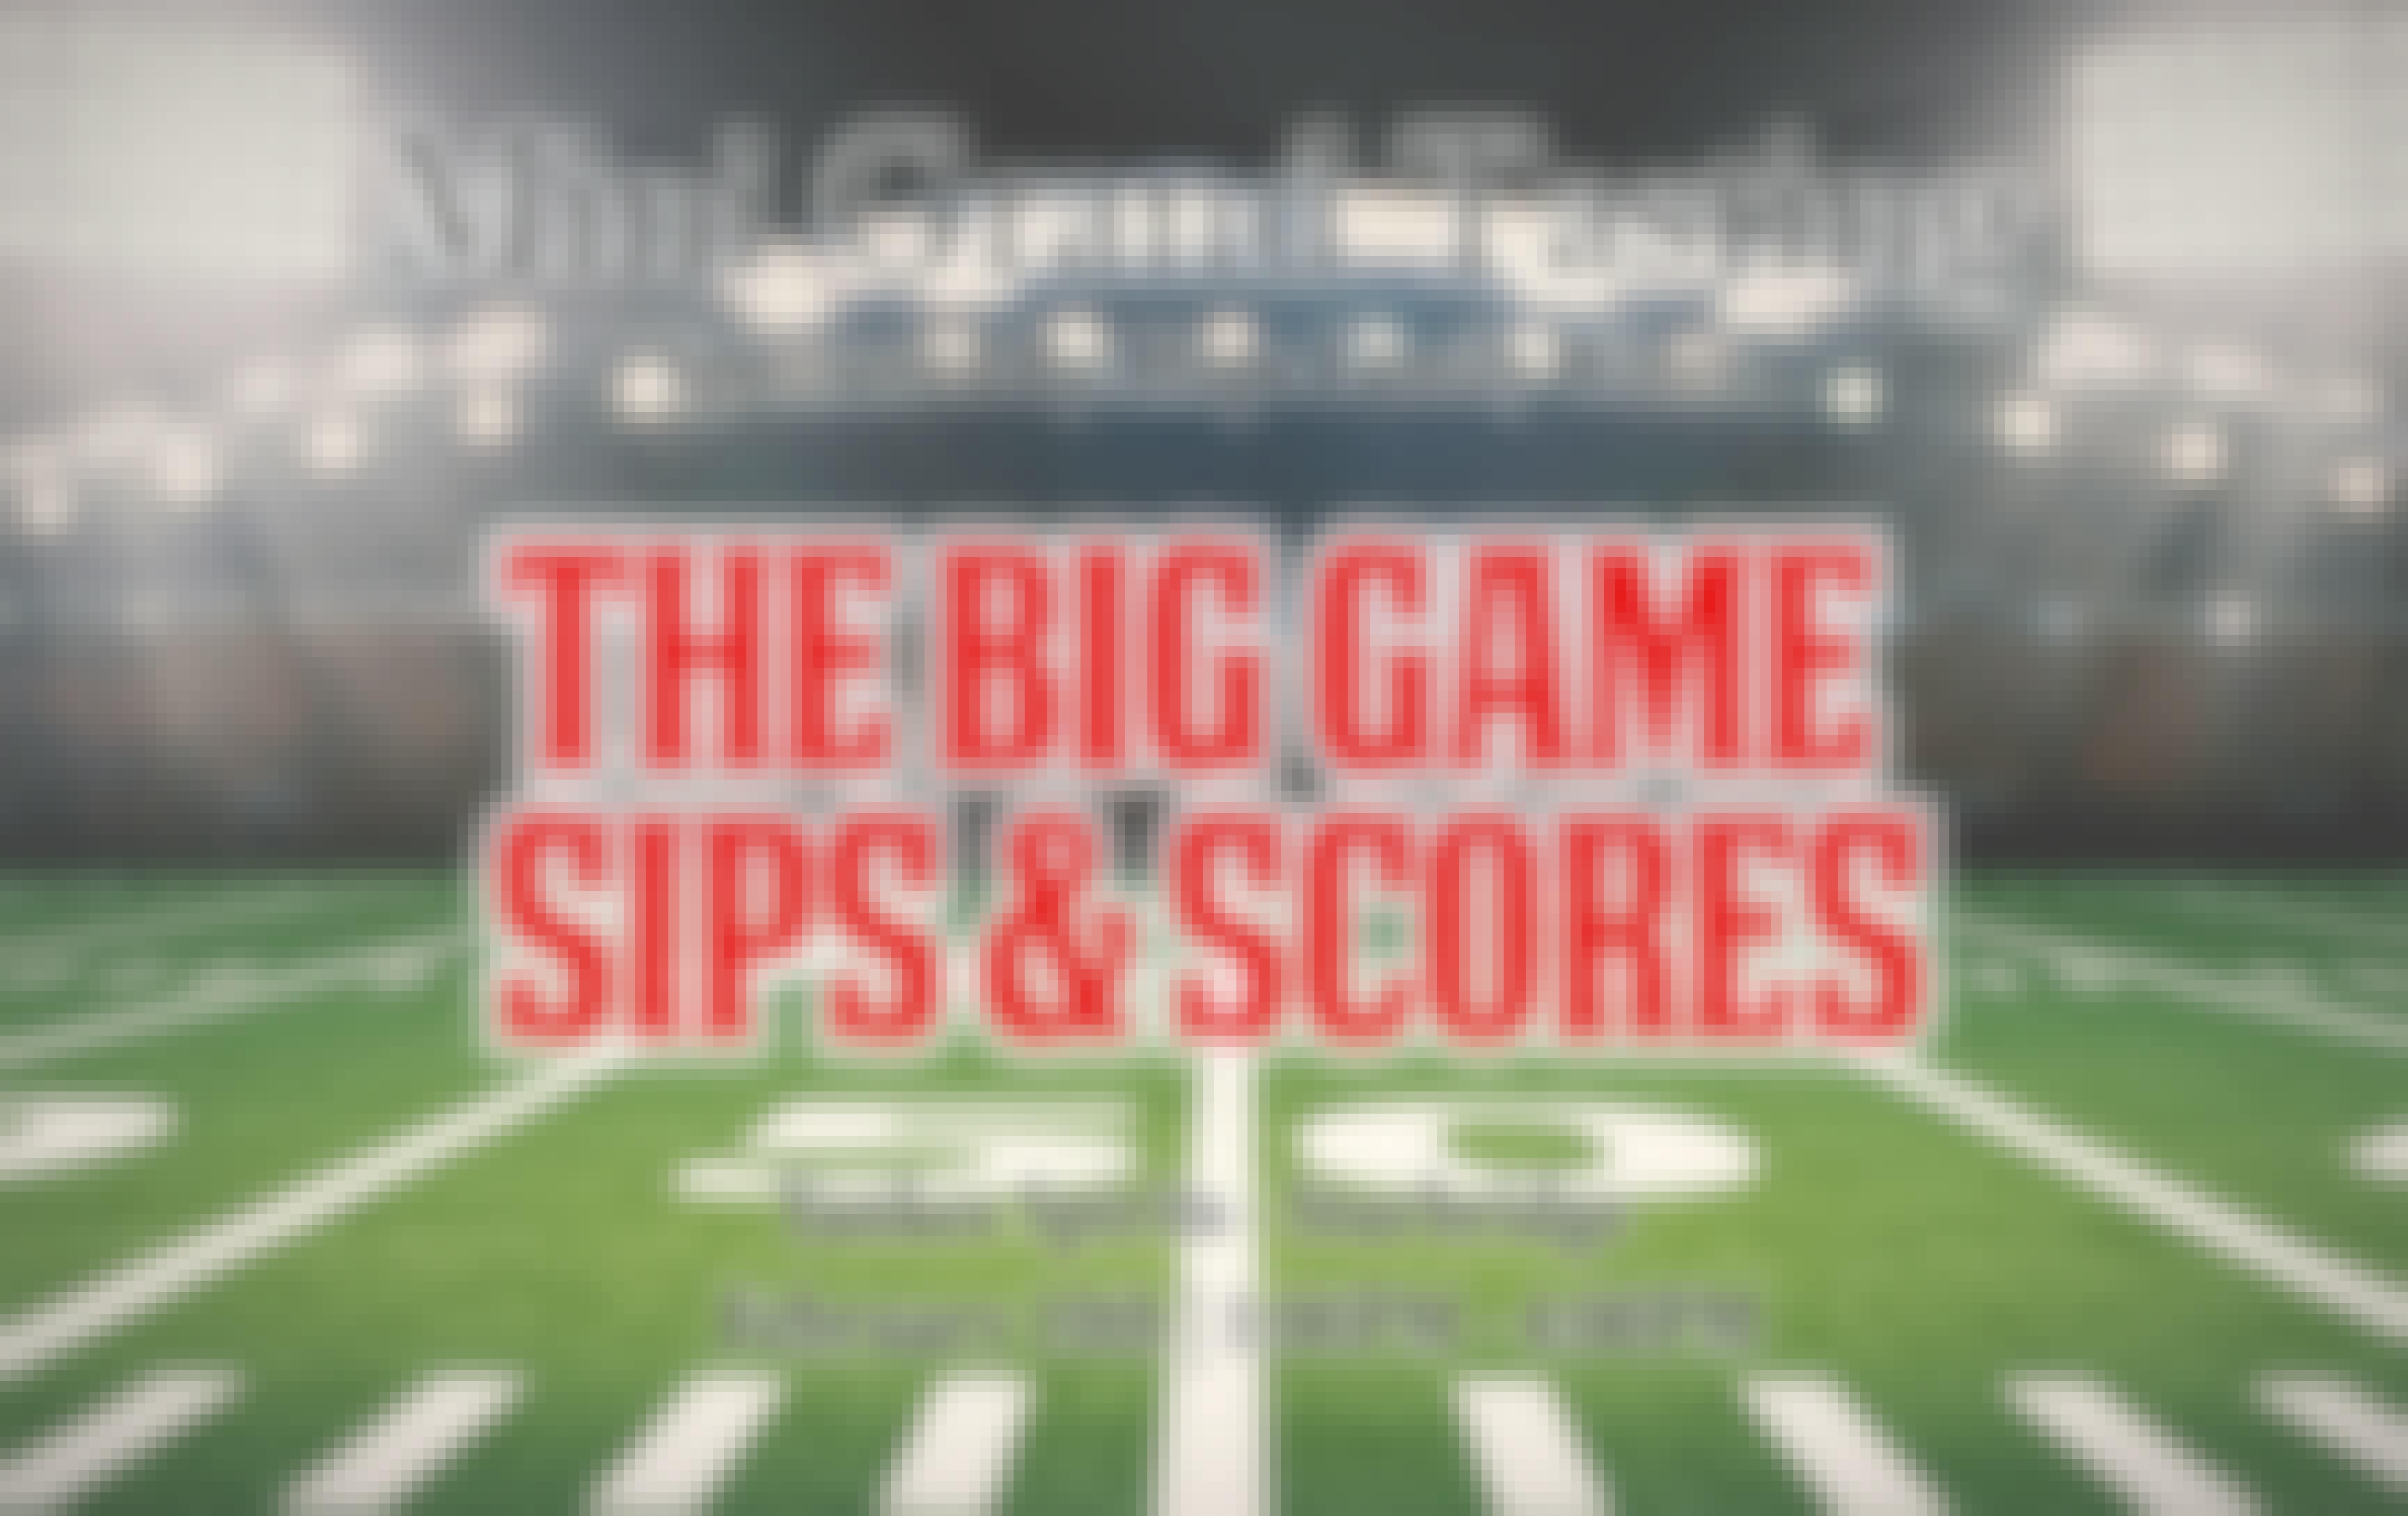 Mini Grand - The Big Game Sips & Scores - Beer, Wine & Spirits Tasting Event